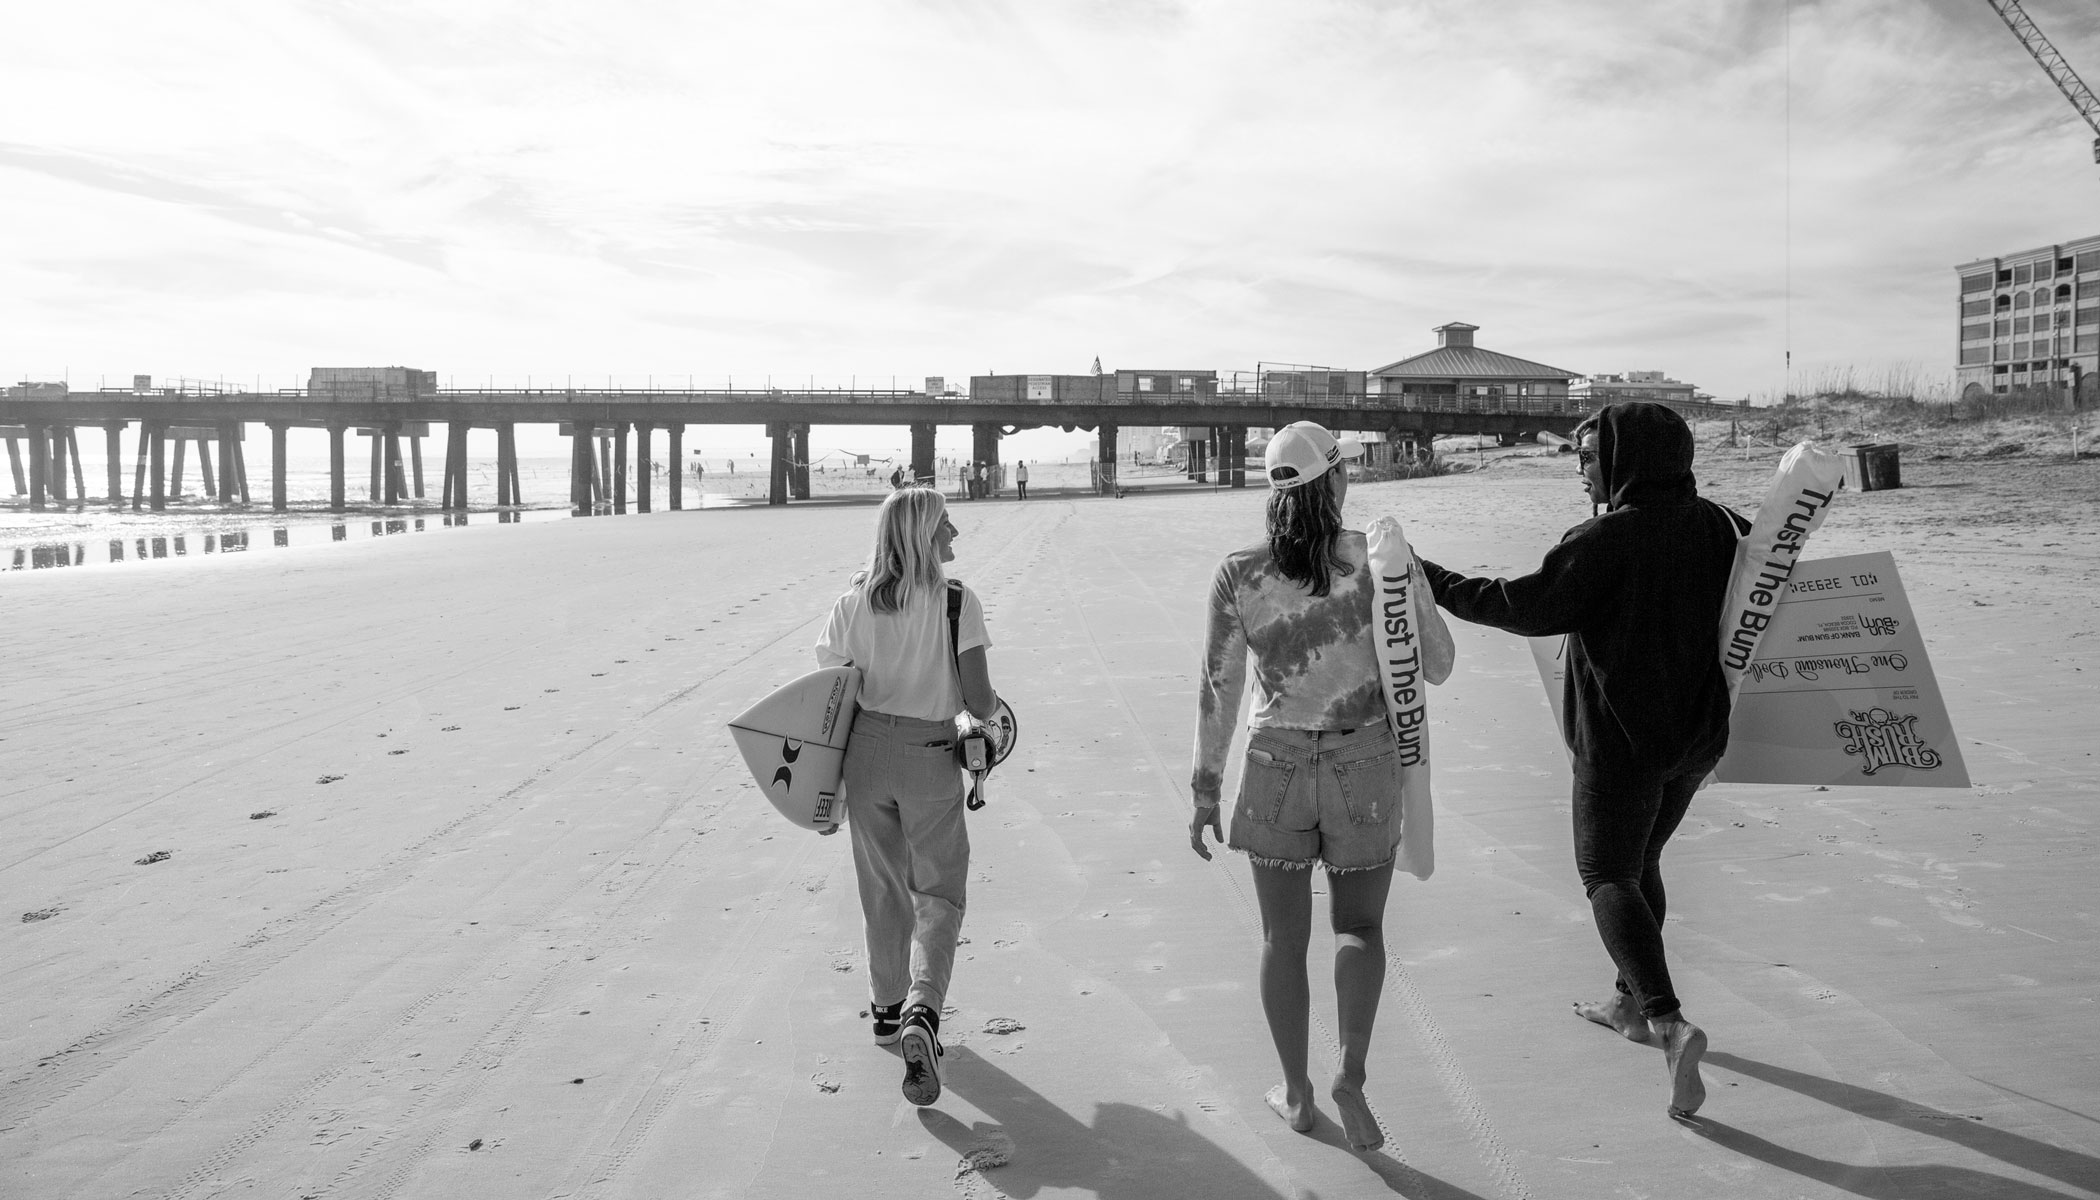 Surfers walking on Jacksonville Beach in black and white